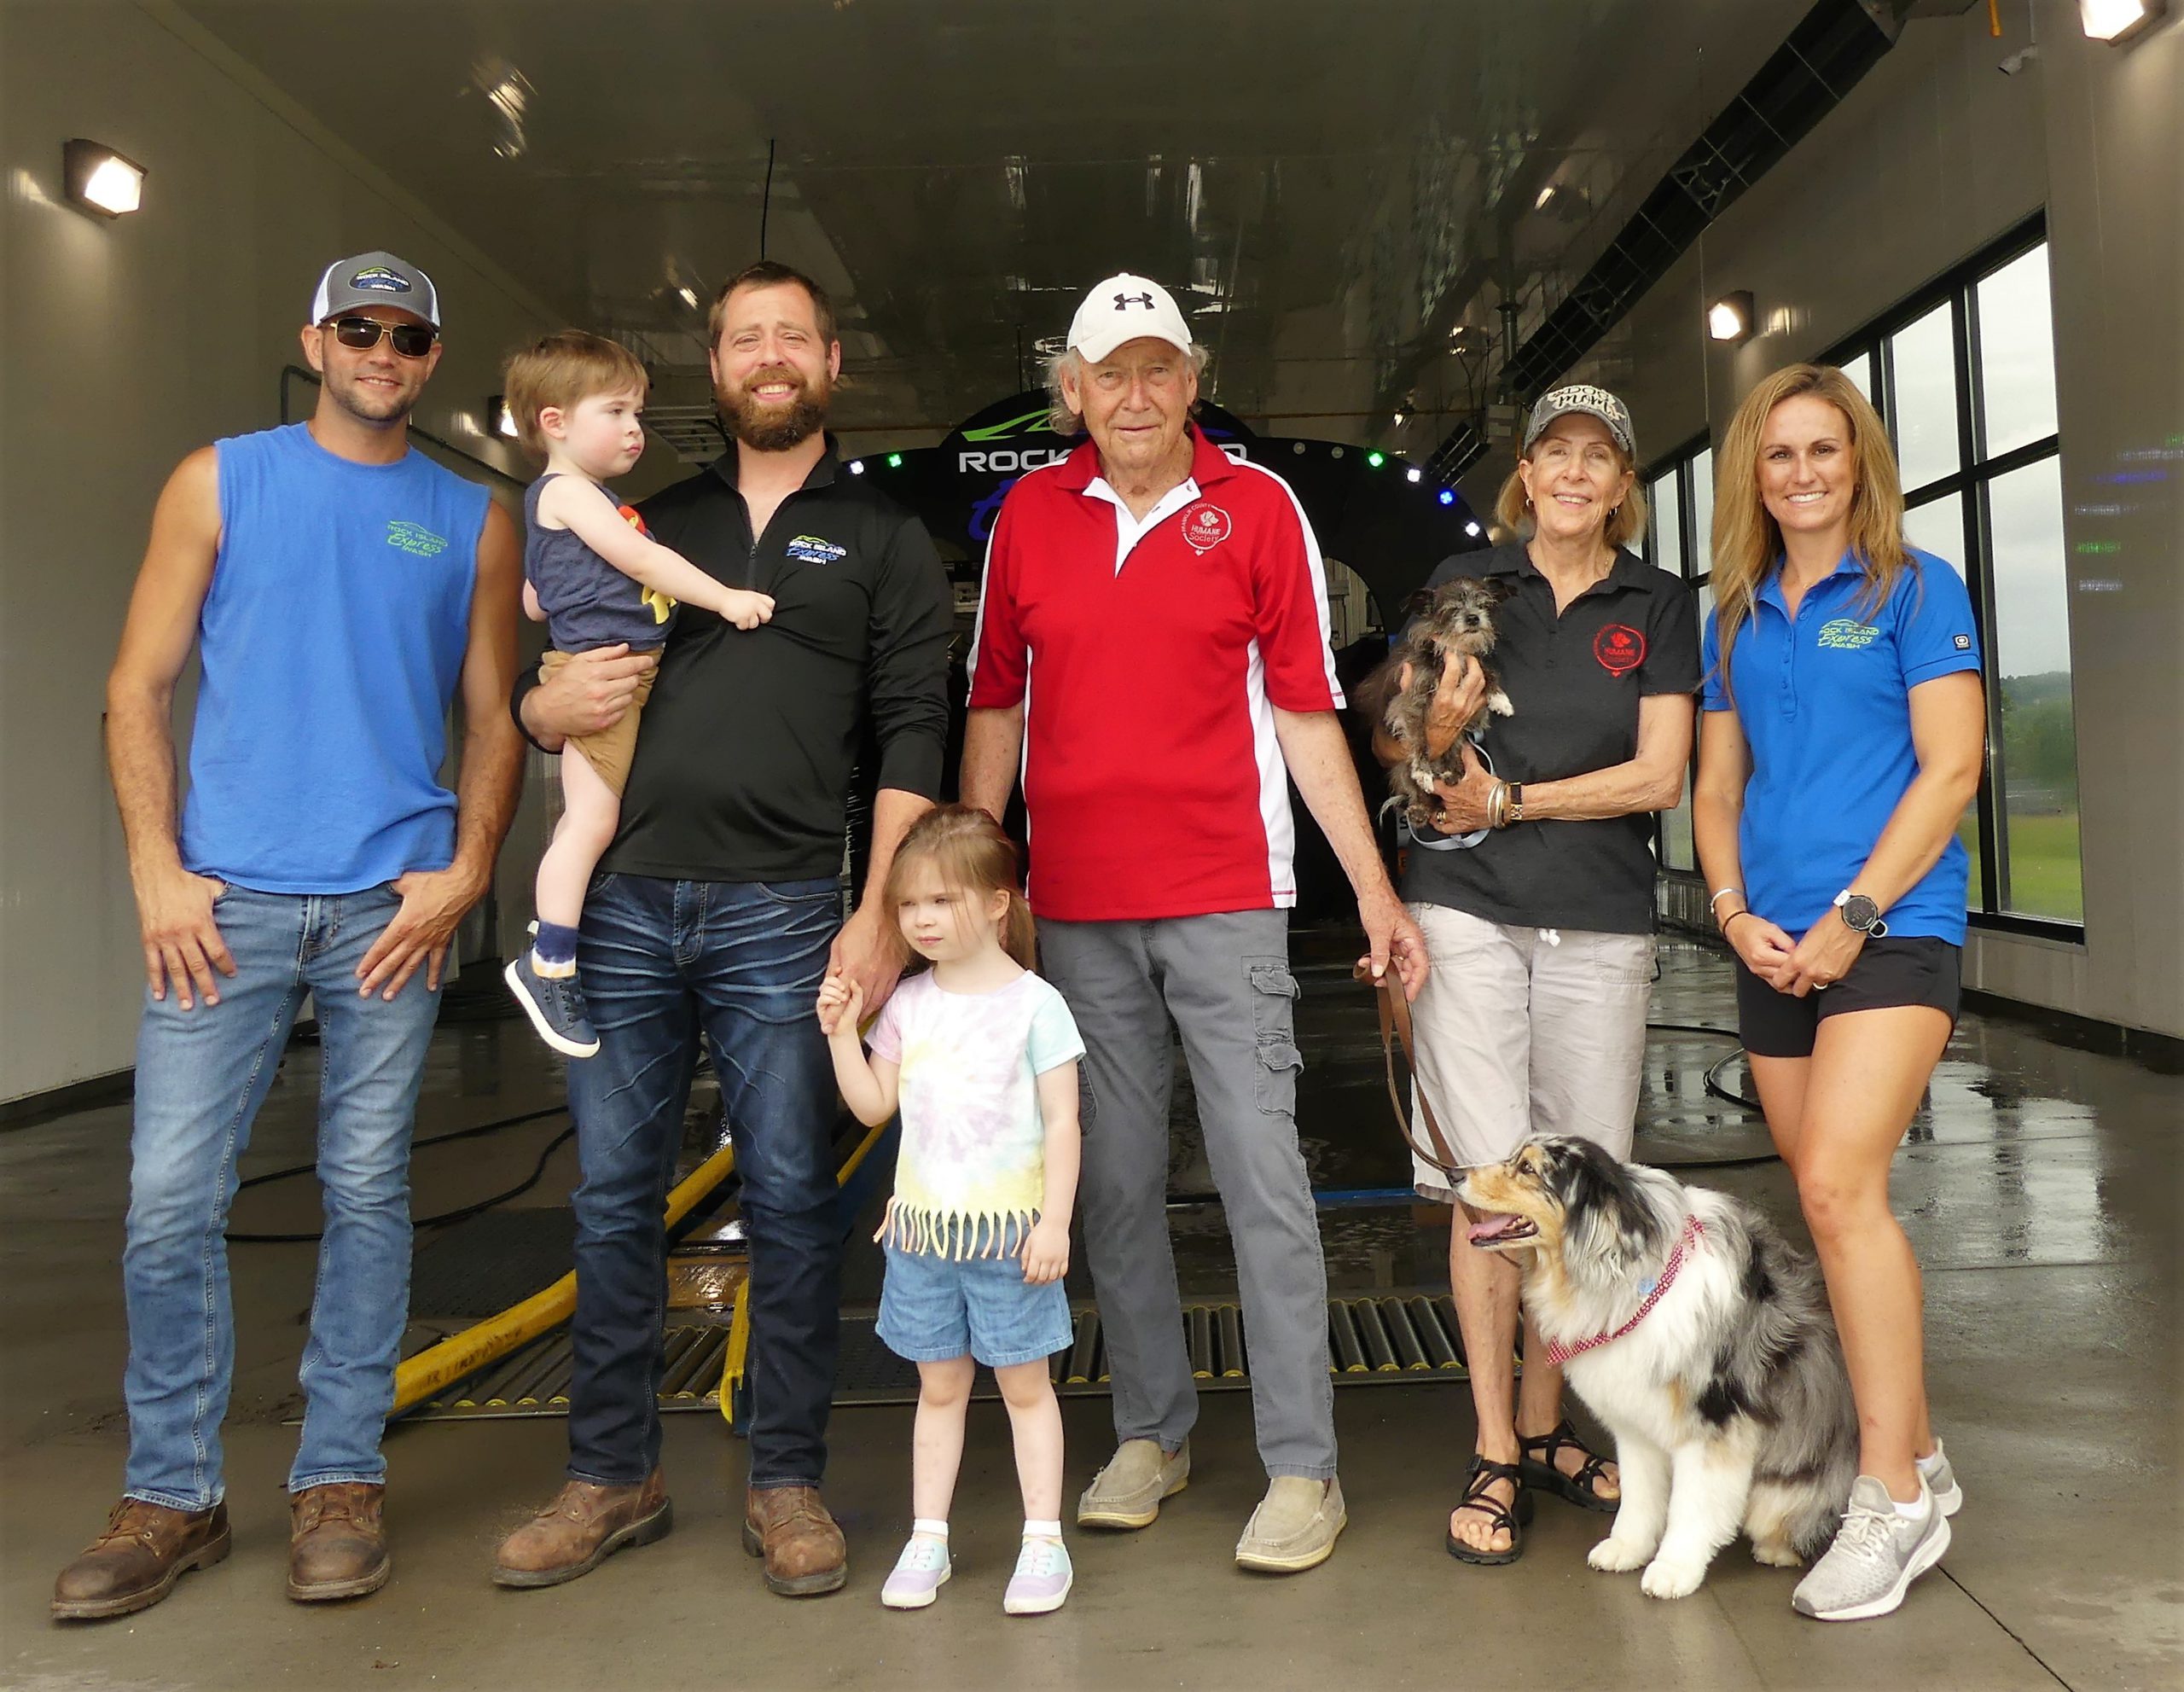 Jeff Fox, Zach Hagedorn holding son Fred, daughter Charley Hagedorn, Ron Foan, Pat Foan, and Jessica Fox. Slippers and Bandit, too, of course.